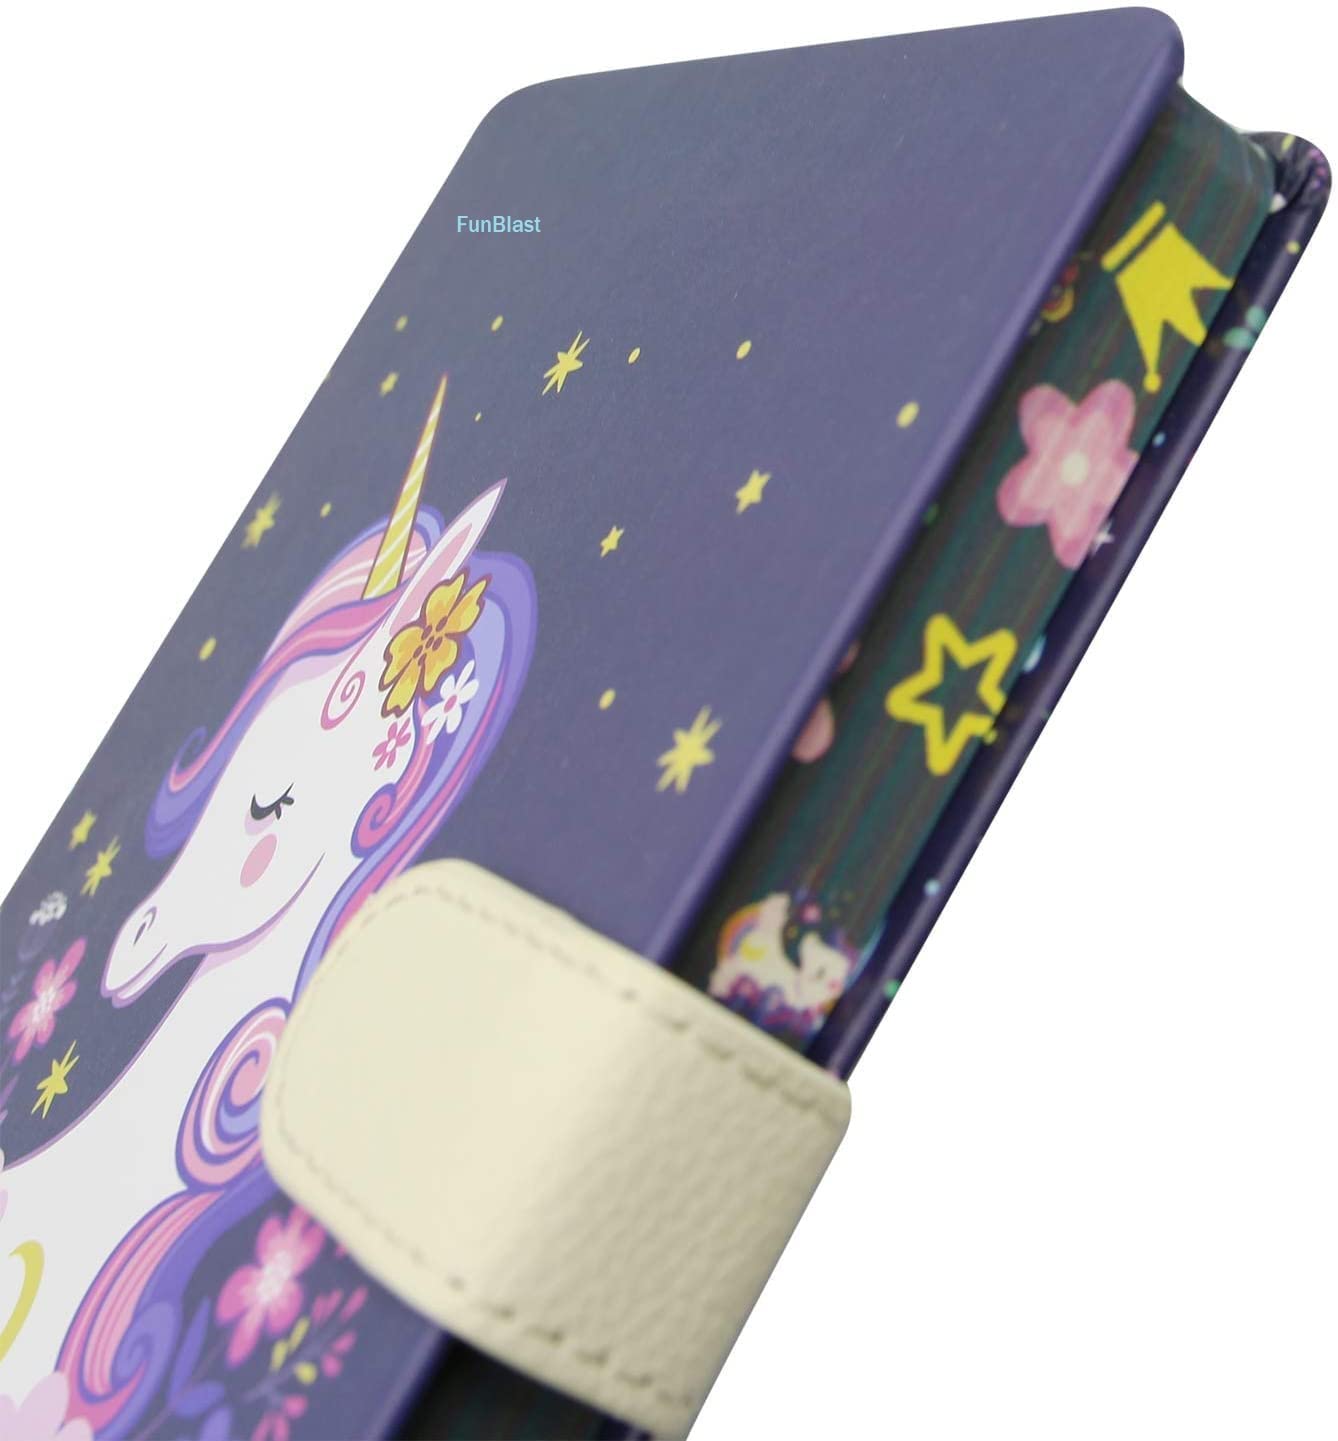 Unicorn Lock Notebook Diary for Kids, Fancy Unicorn Design Diary Notepad for College Students (Pack of 1 Pcs ; Random Color)